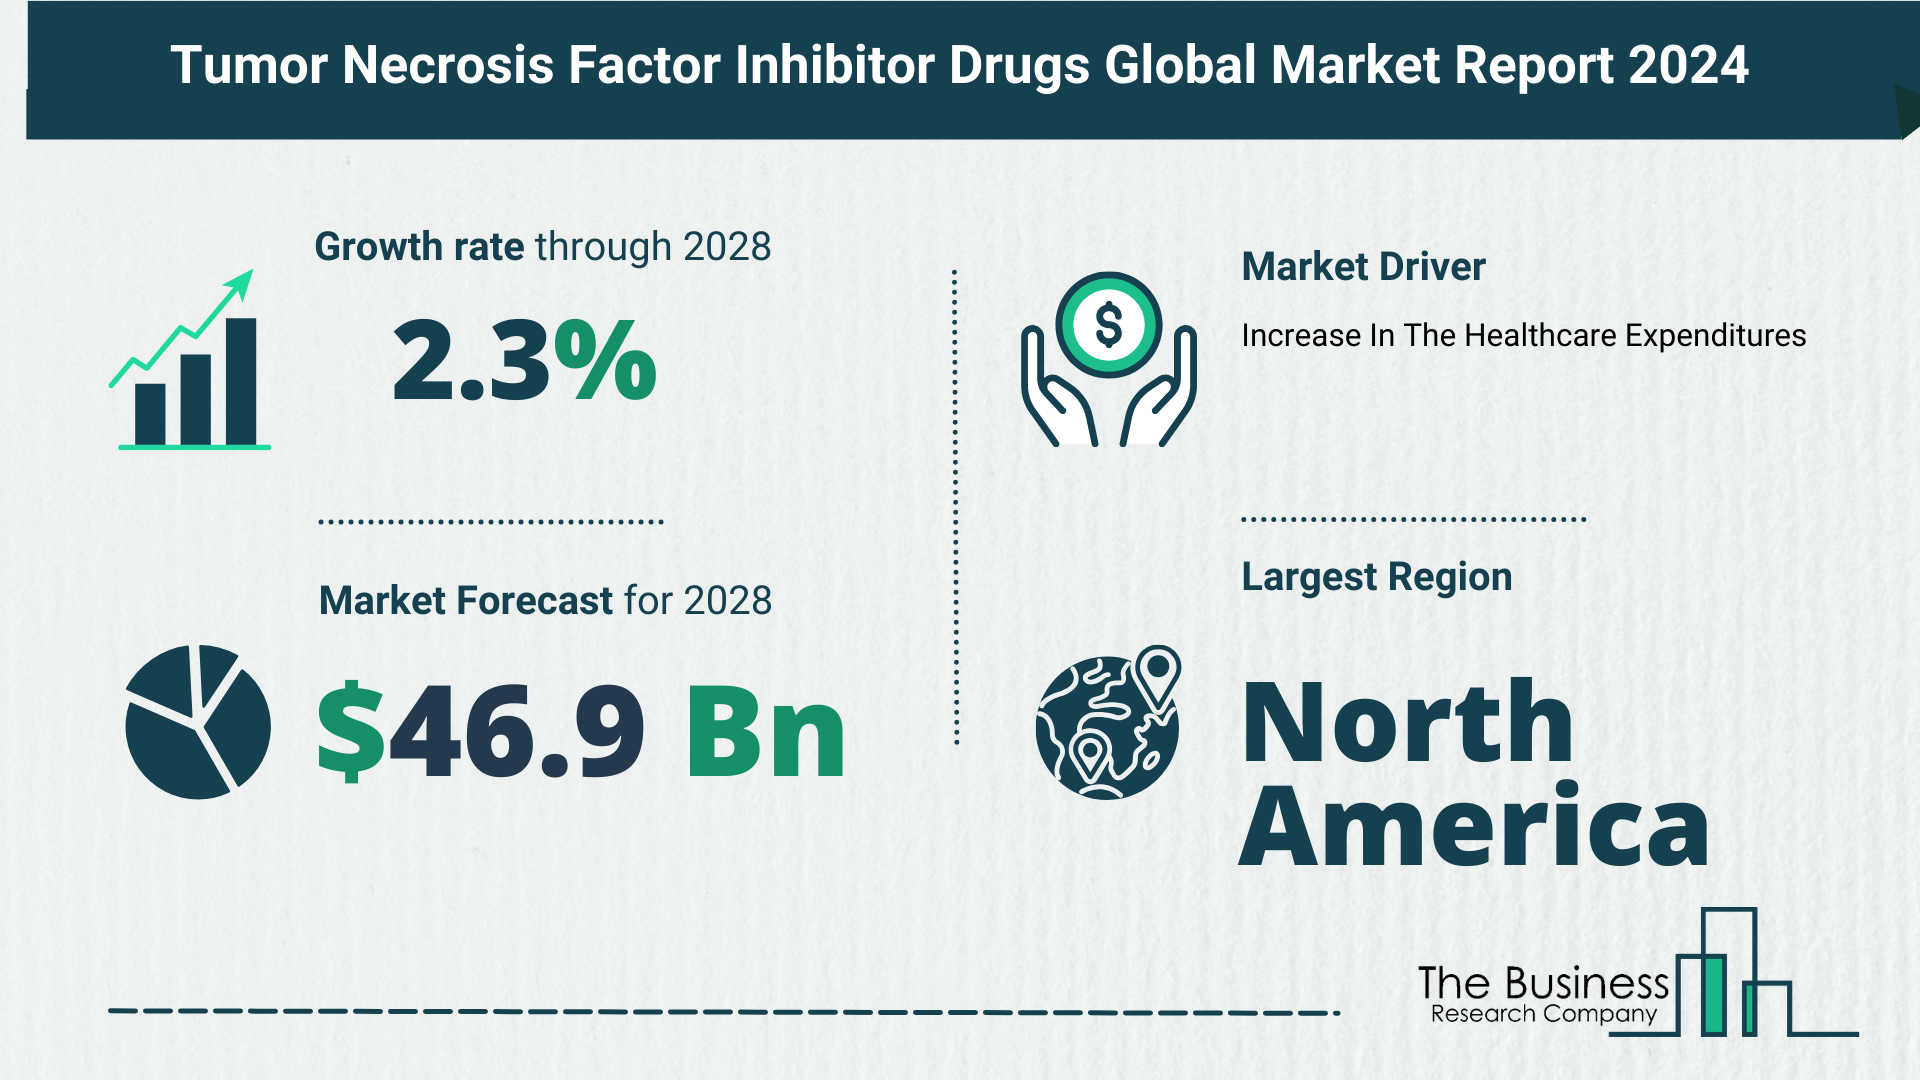 5 Takeaways From The Tumor Necrosis Factor Inhibitor Drugs Market Overview 2024